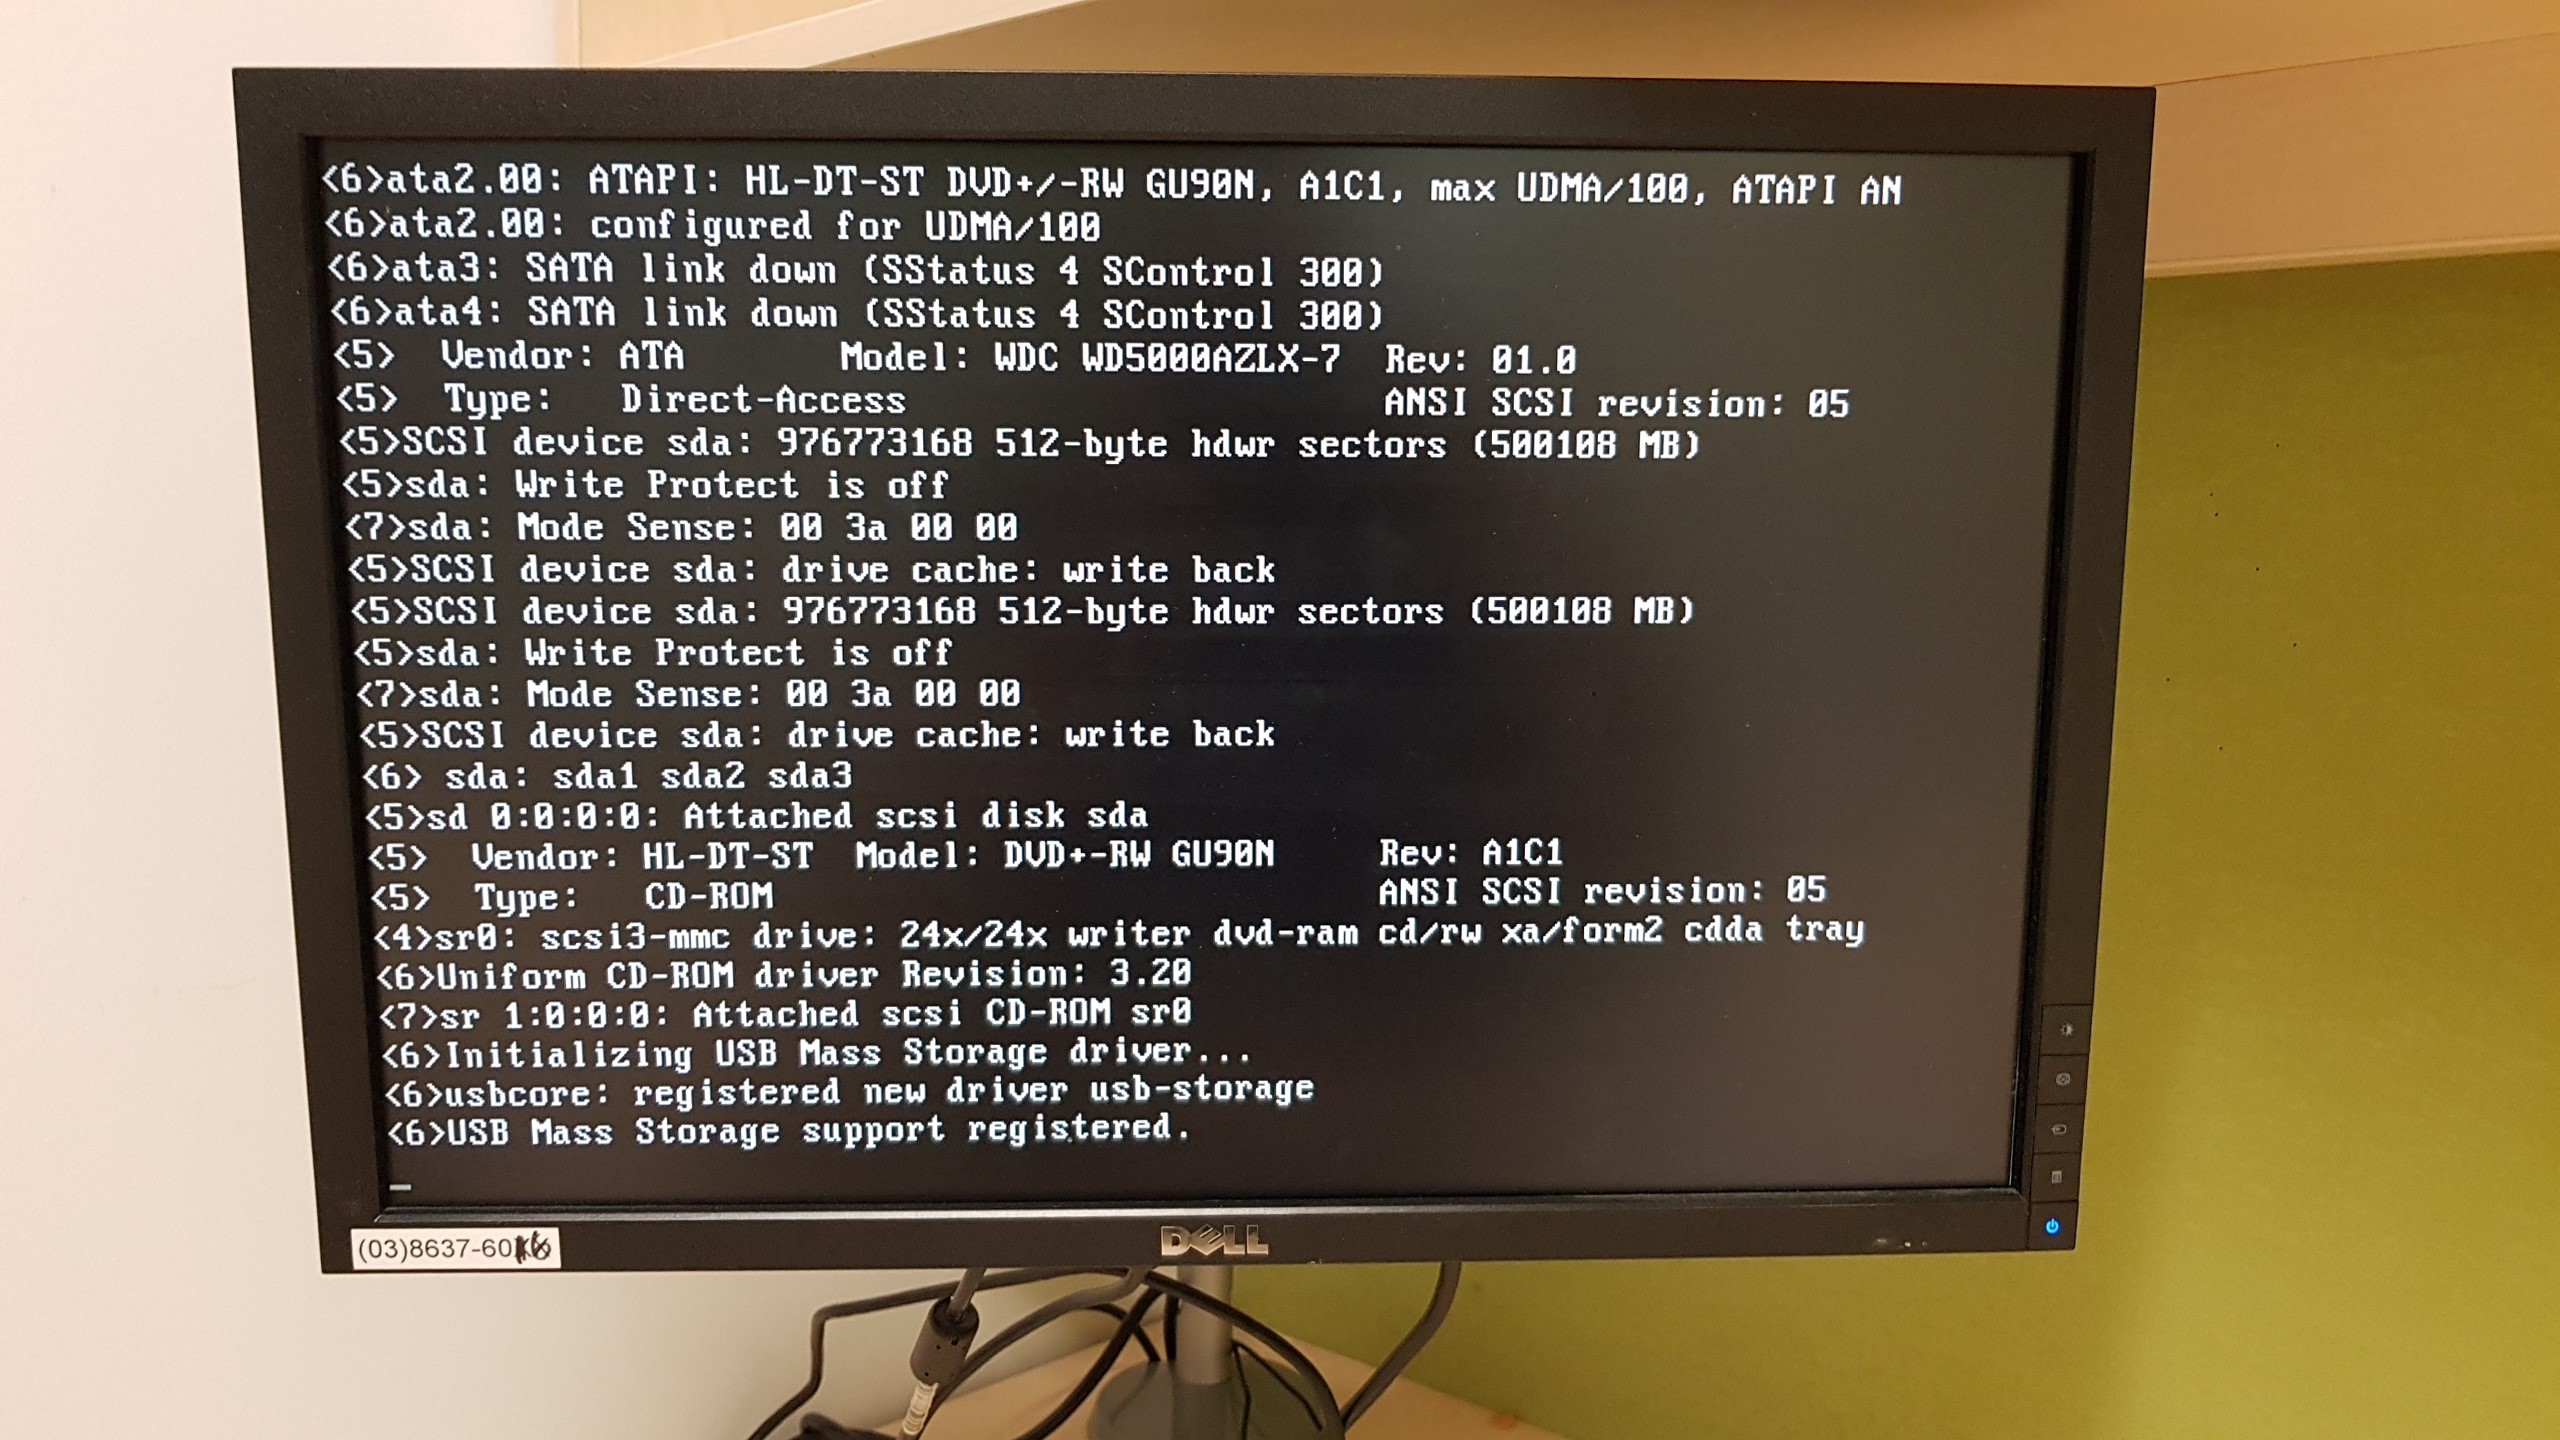 Boot-info from PS2 (ALT-F2) showing kernel booted and devices good. Disk found.